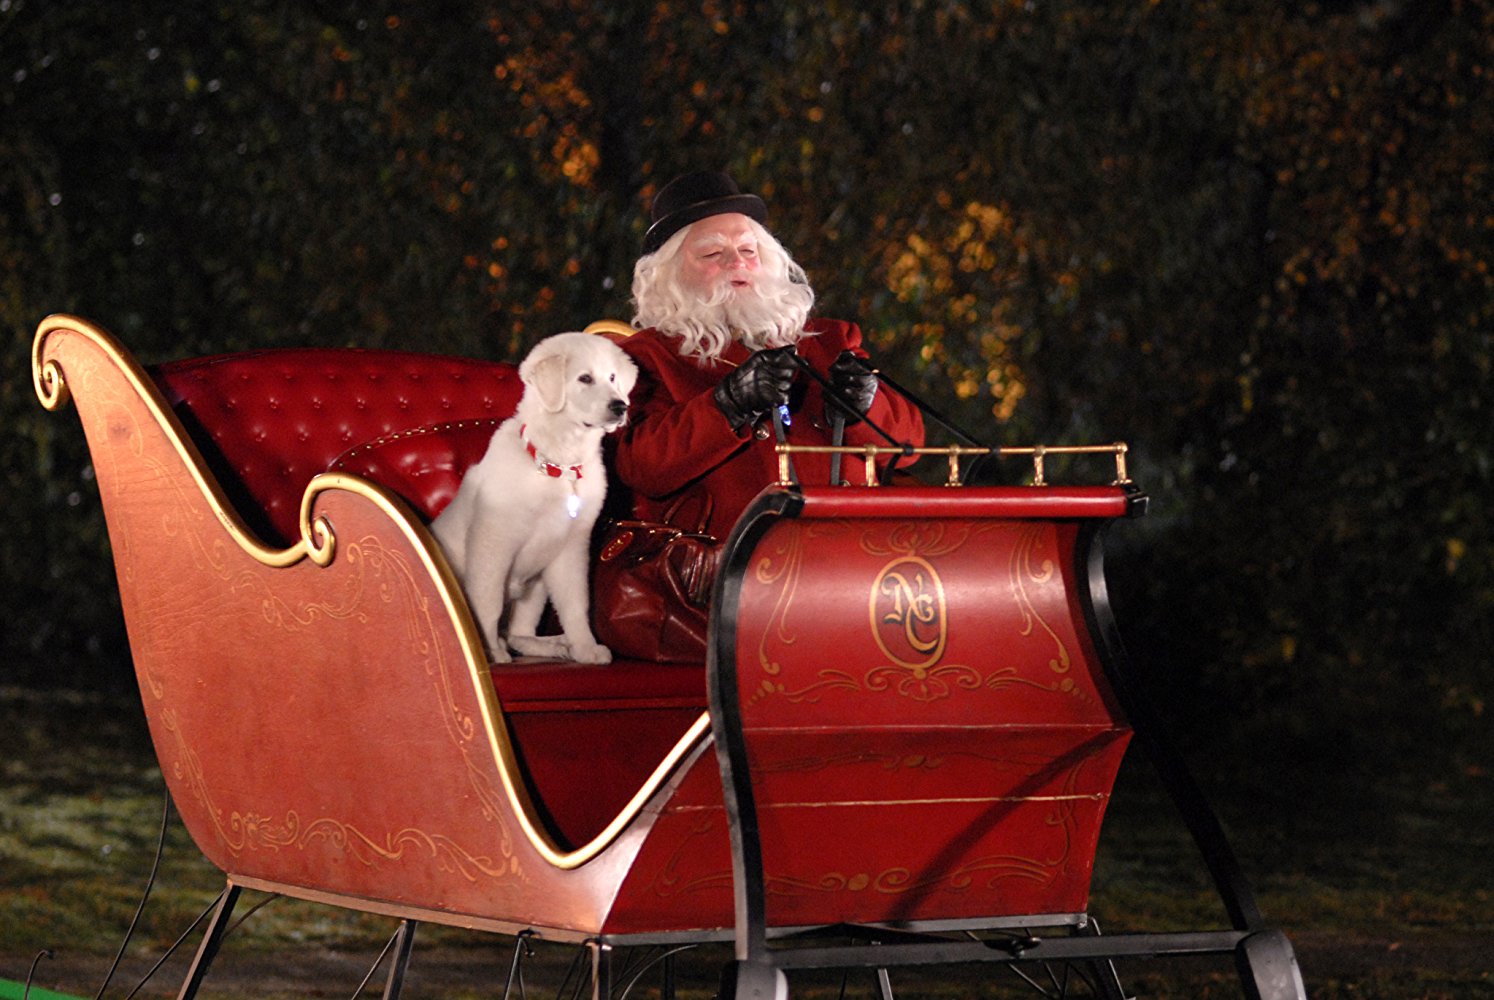 PHOTO: The Search for Santa Paws, 2010.